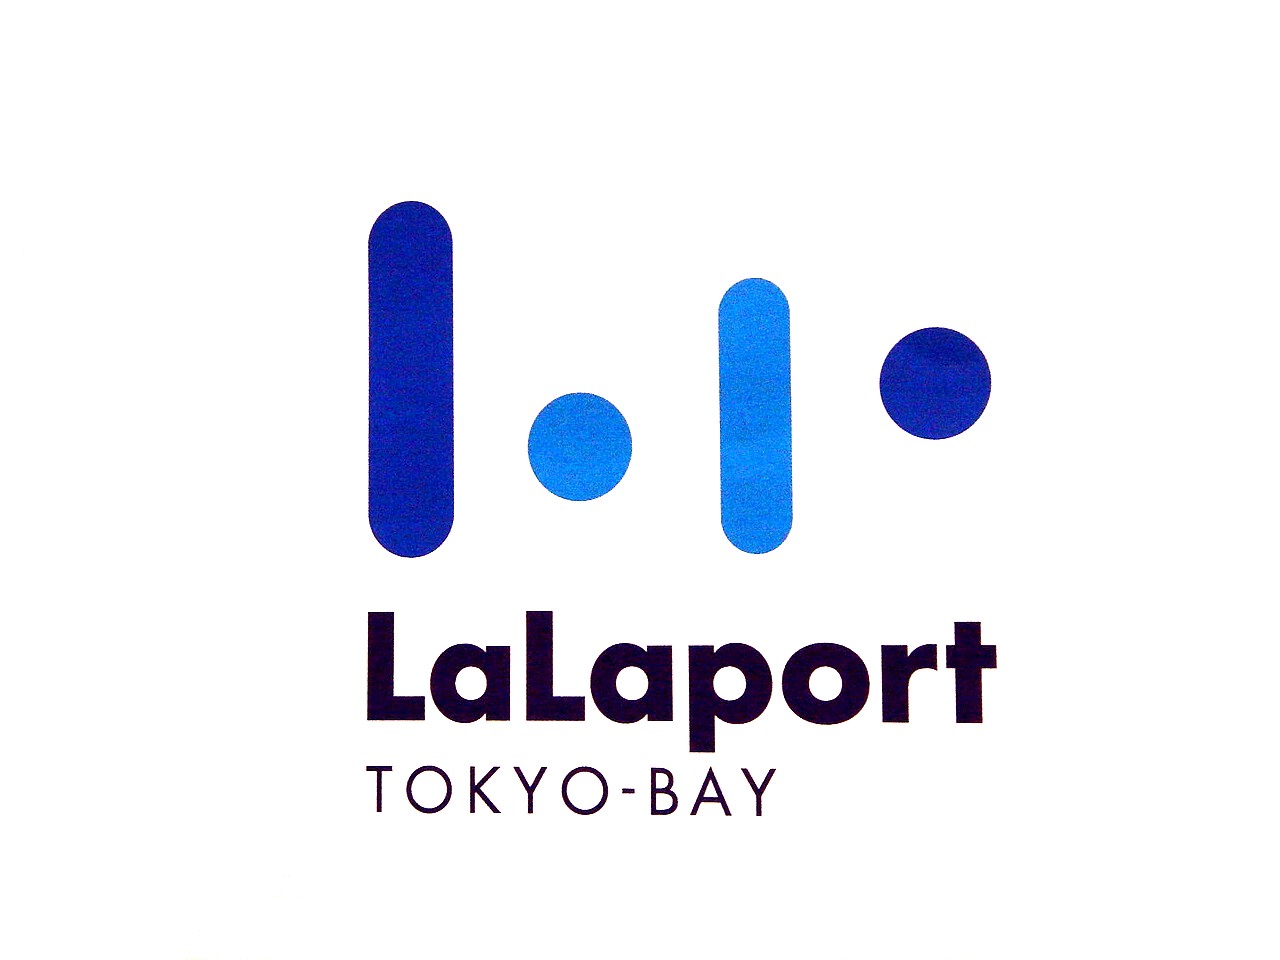 Store Guidance Digital Signage for  "LaLaport TOKYO-BAY"